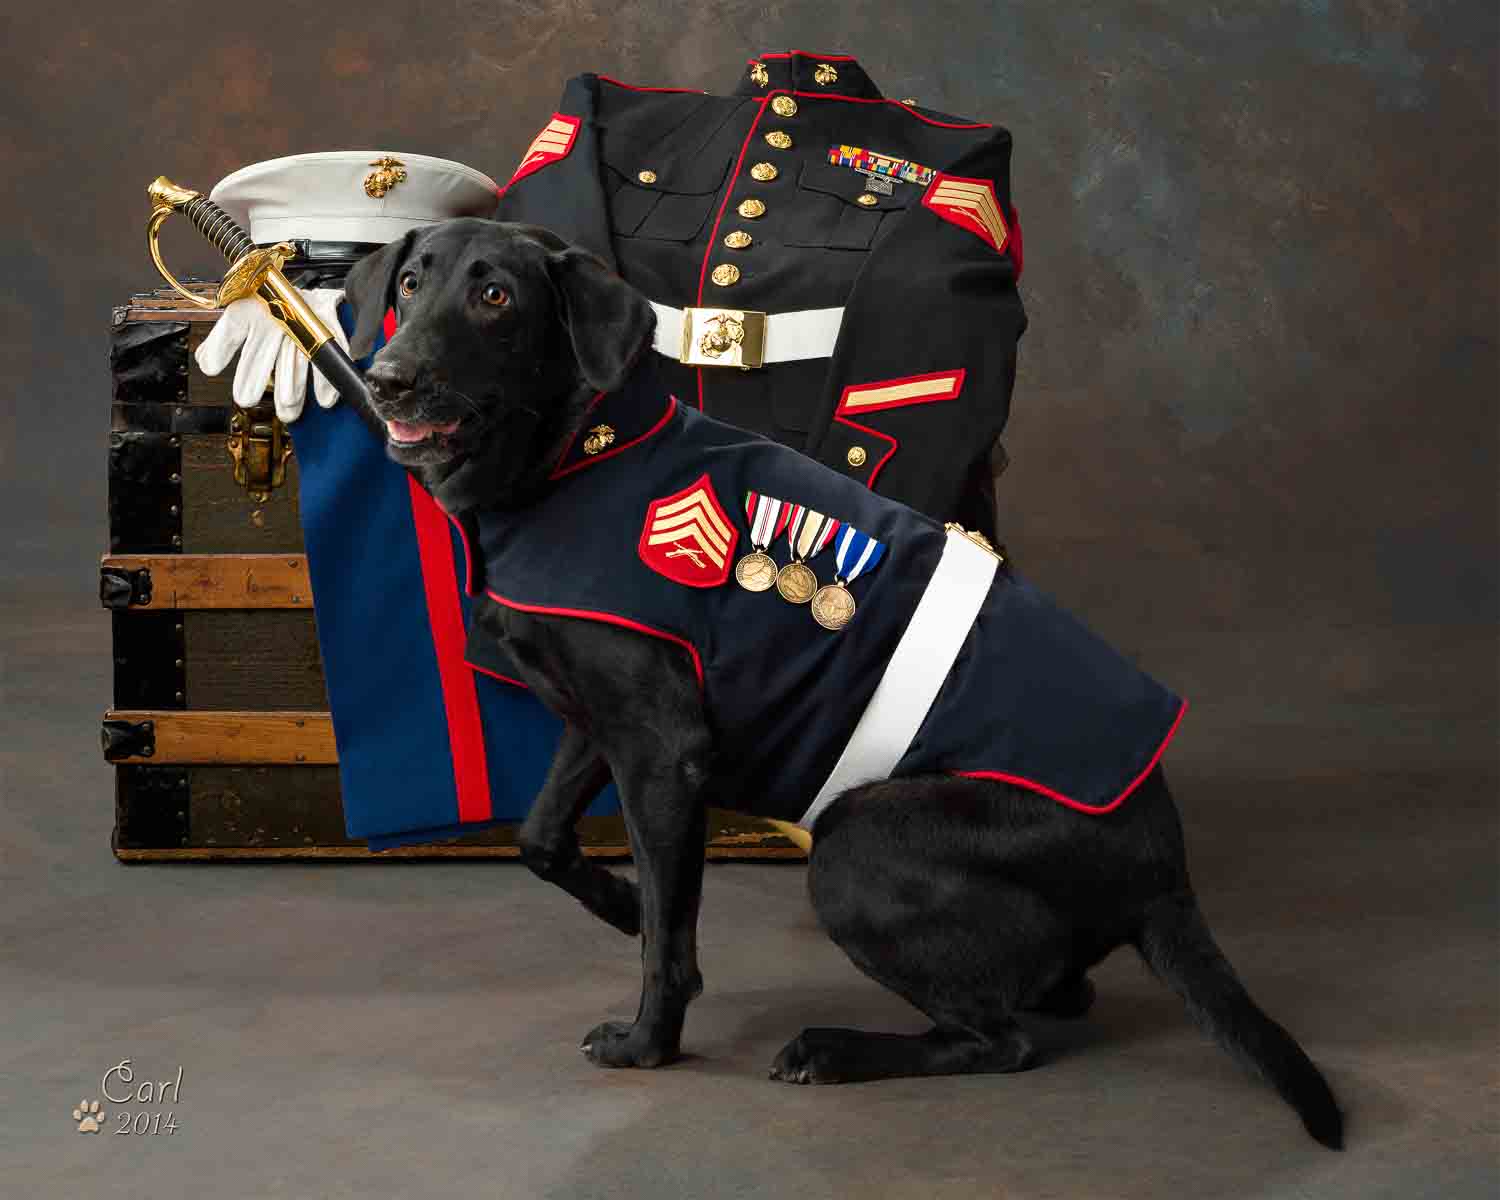 A black dog in uniform sitting next to a chest.